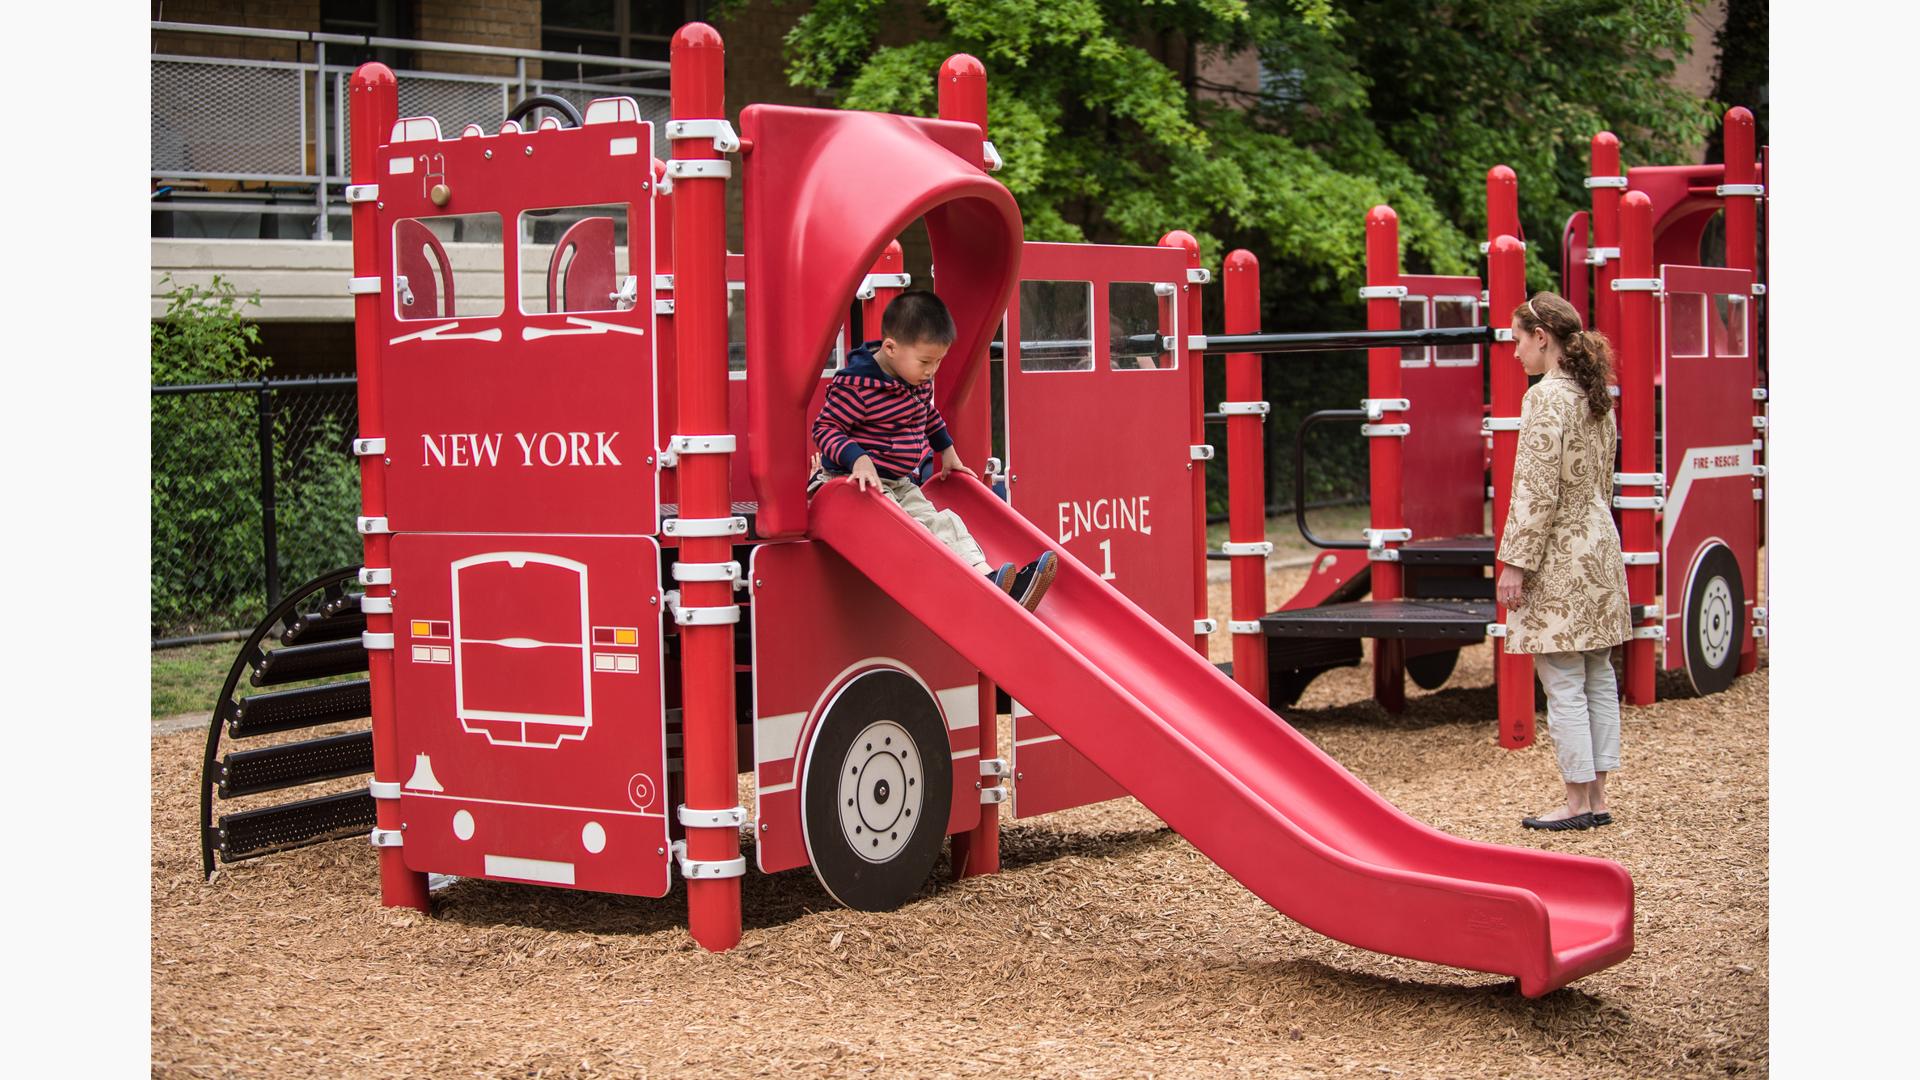 Jonathan L. IeIpi Firefighters Park - Firefighter-themed Playground